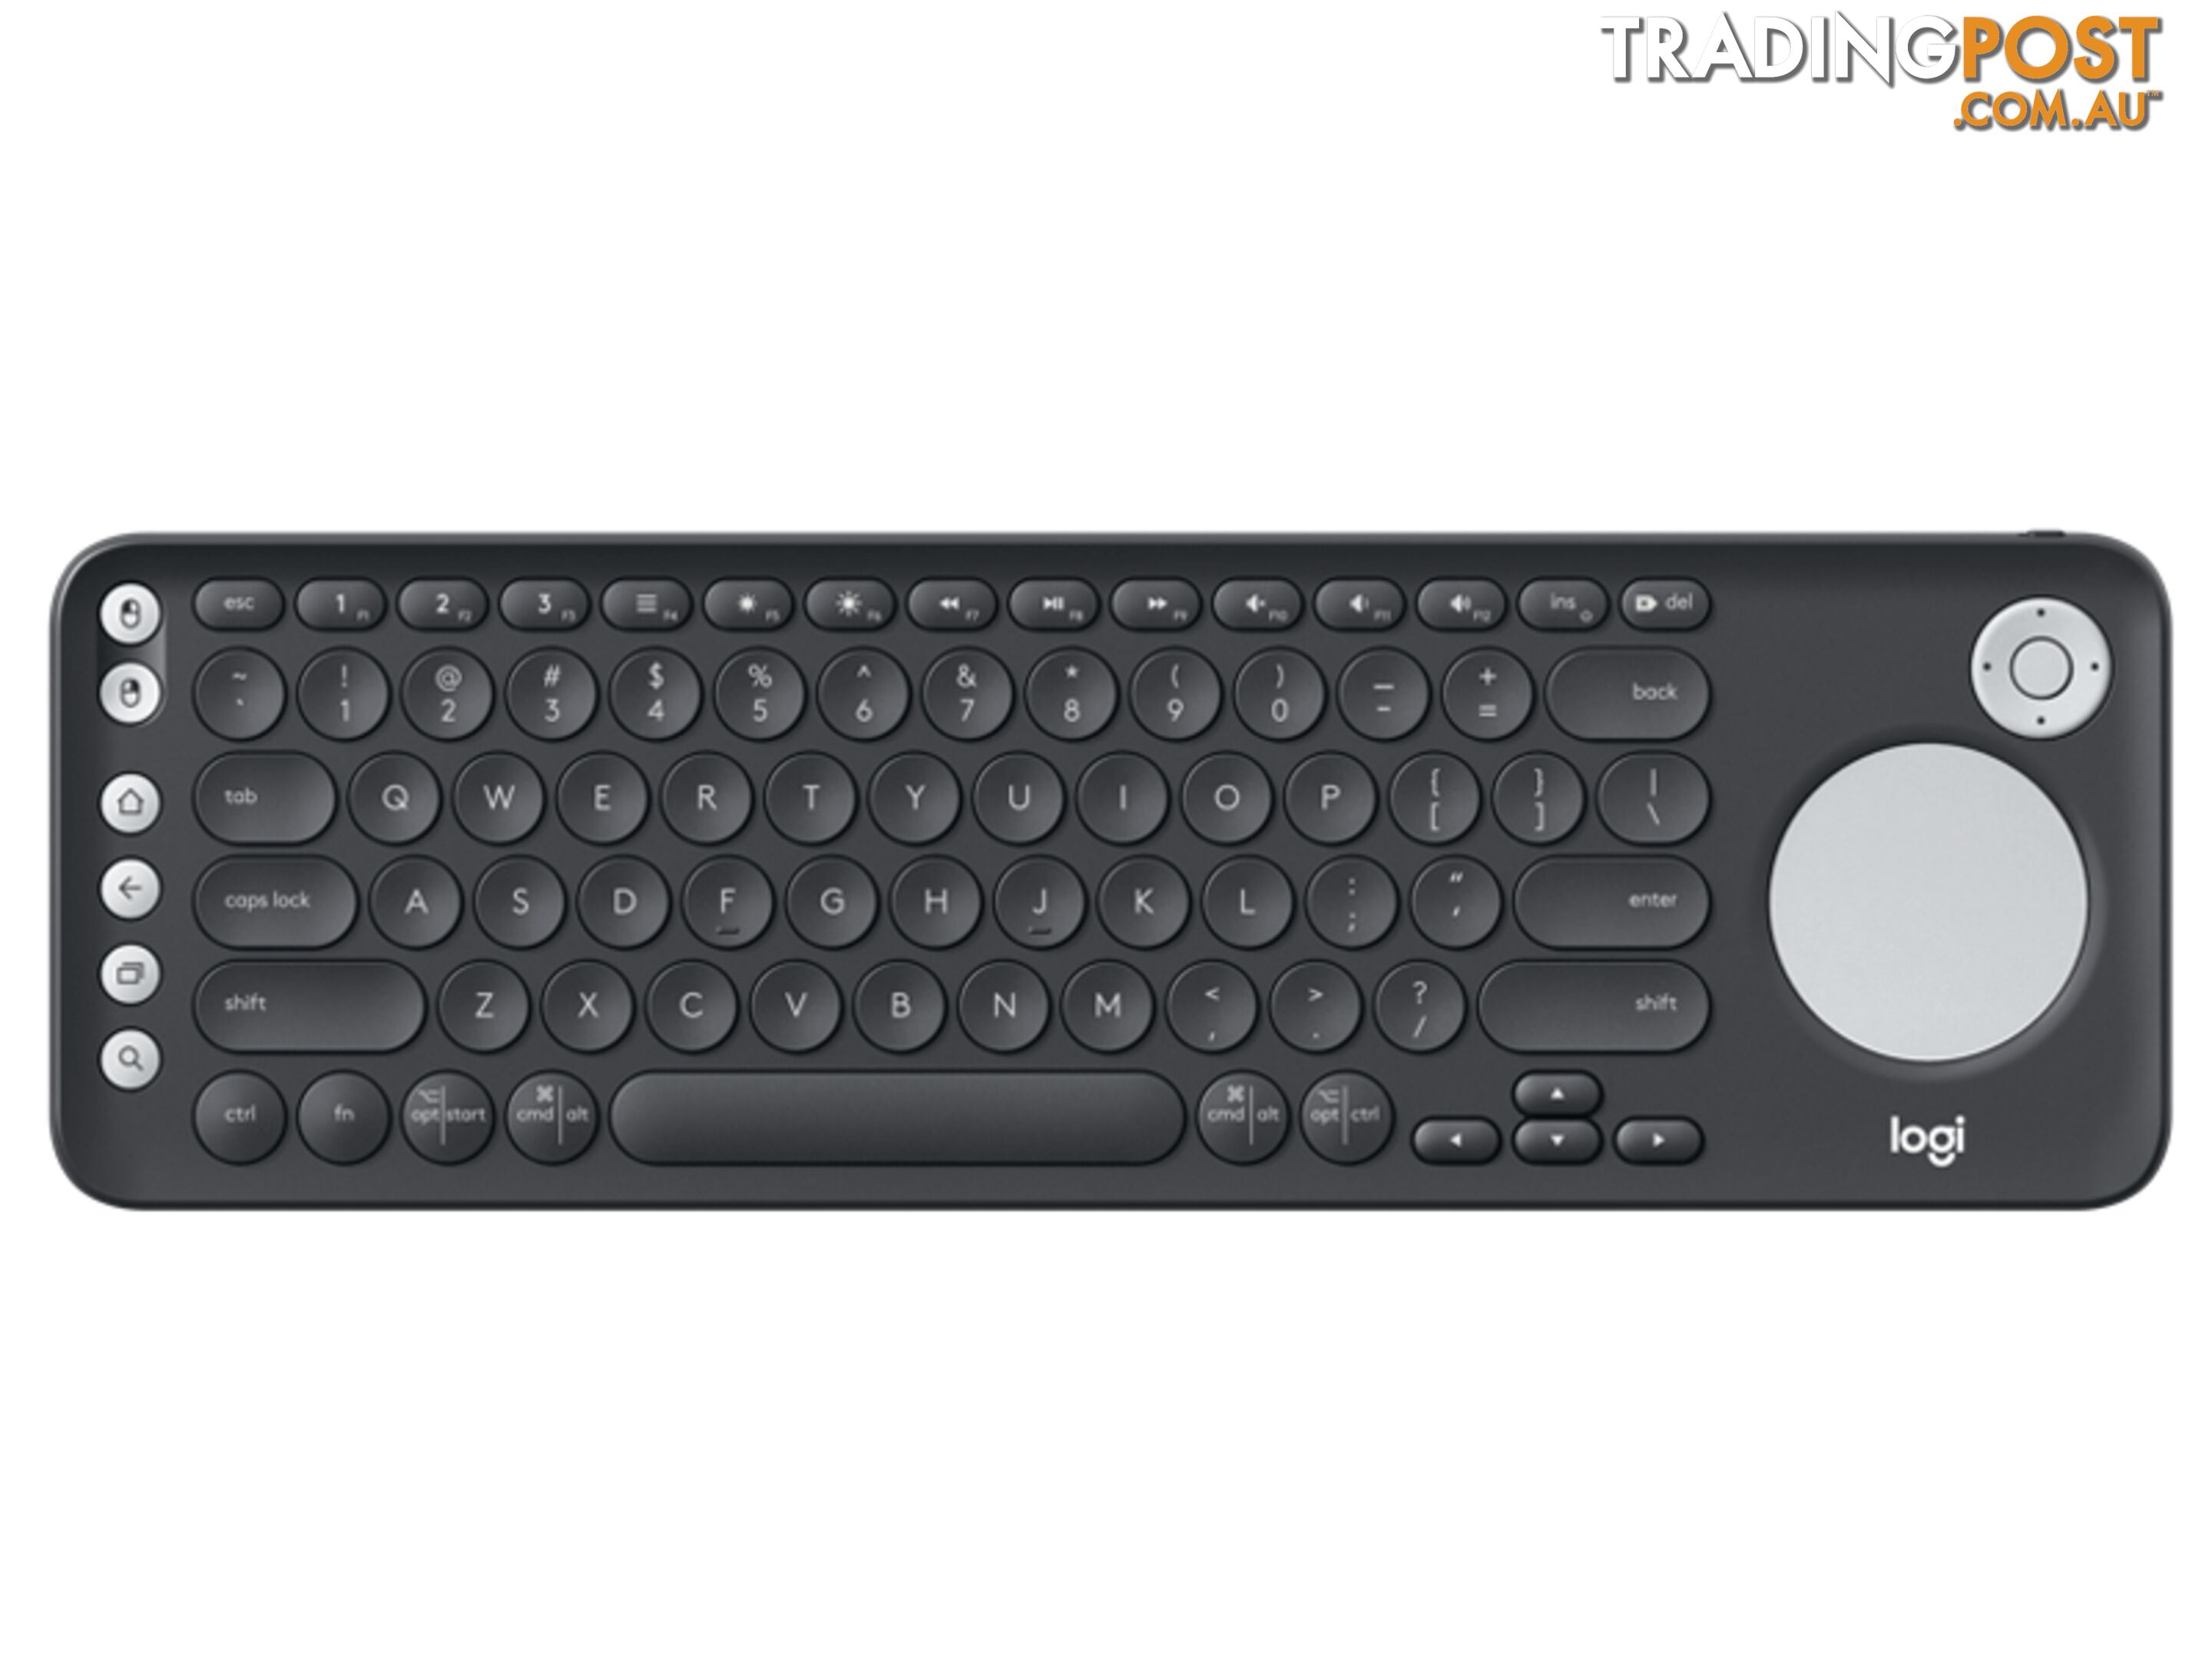 Logitech 920-008843 K600TV-TV Keyboard with Integrated Touchpad and D-pad